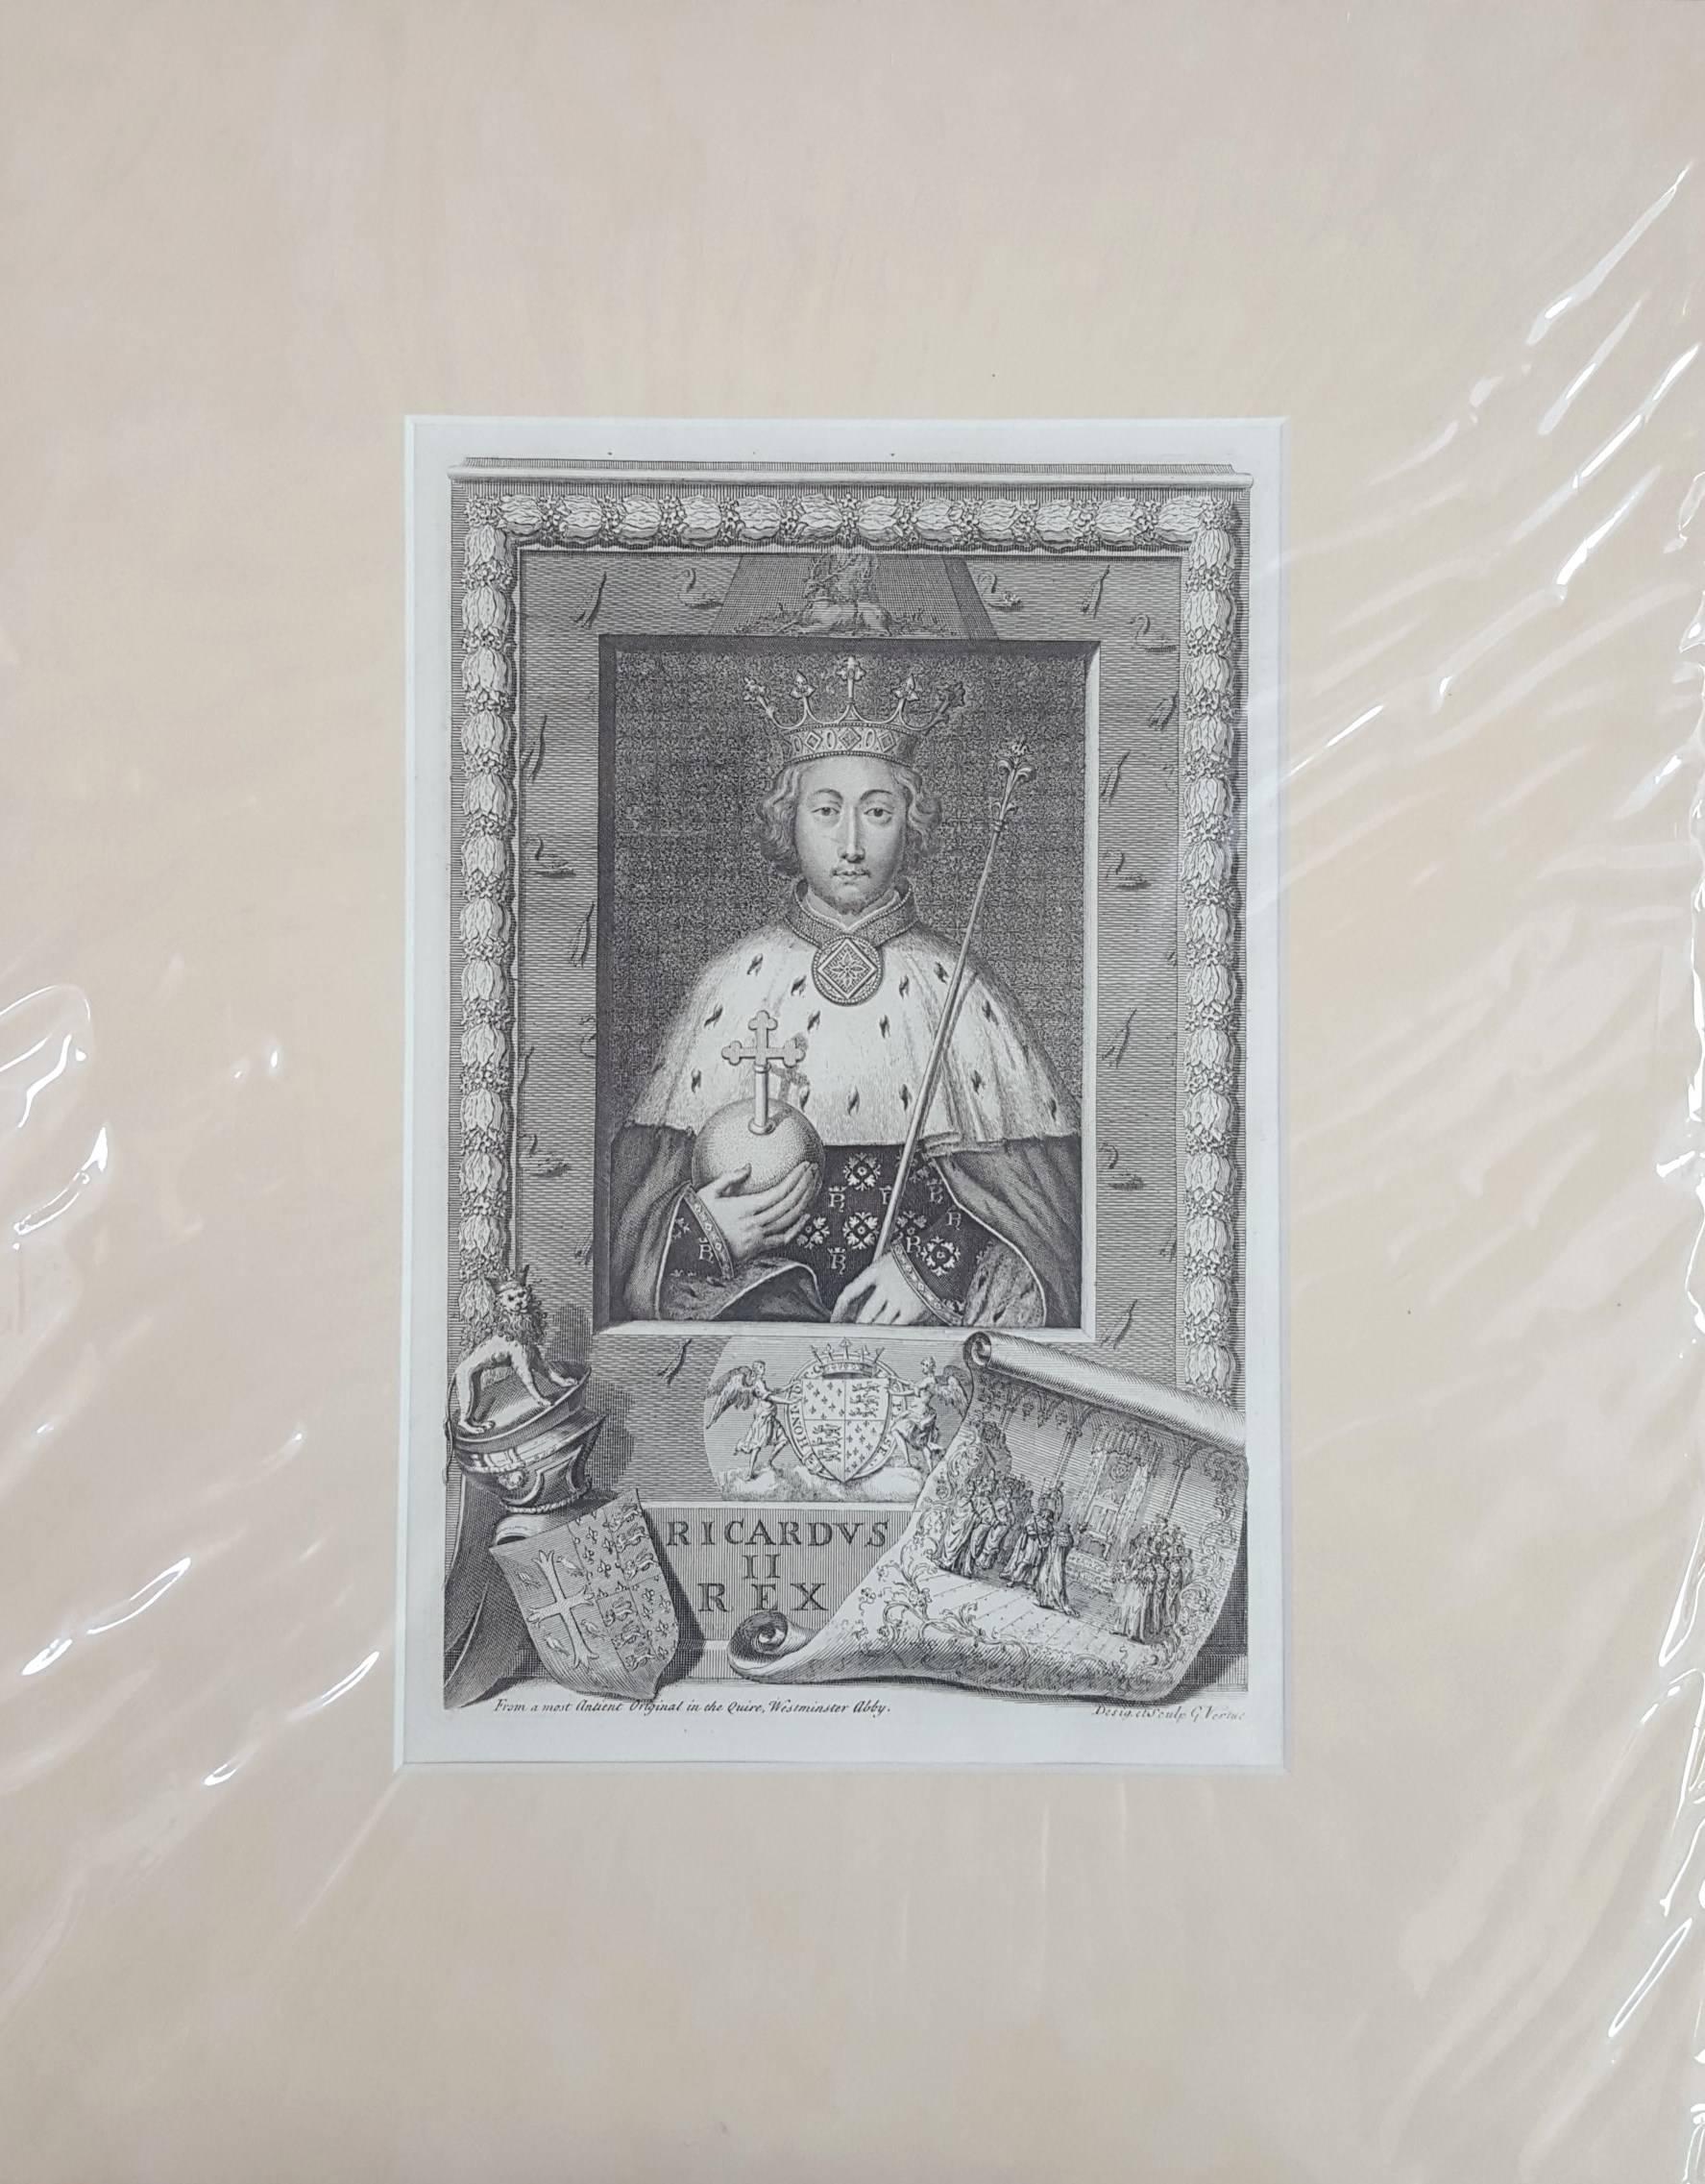 King Richard II /// Old Masters British Royal Family Portrait Engraving Art - Print by George Virtue